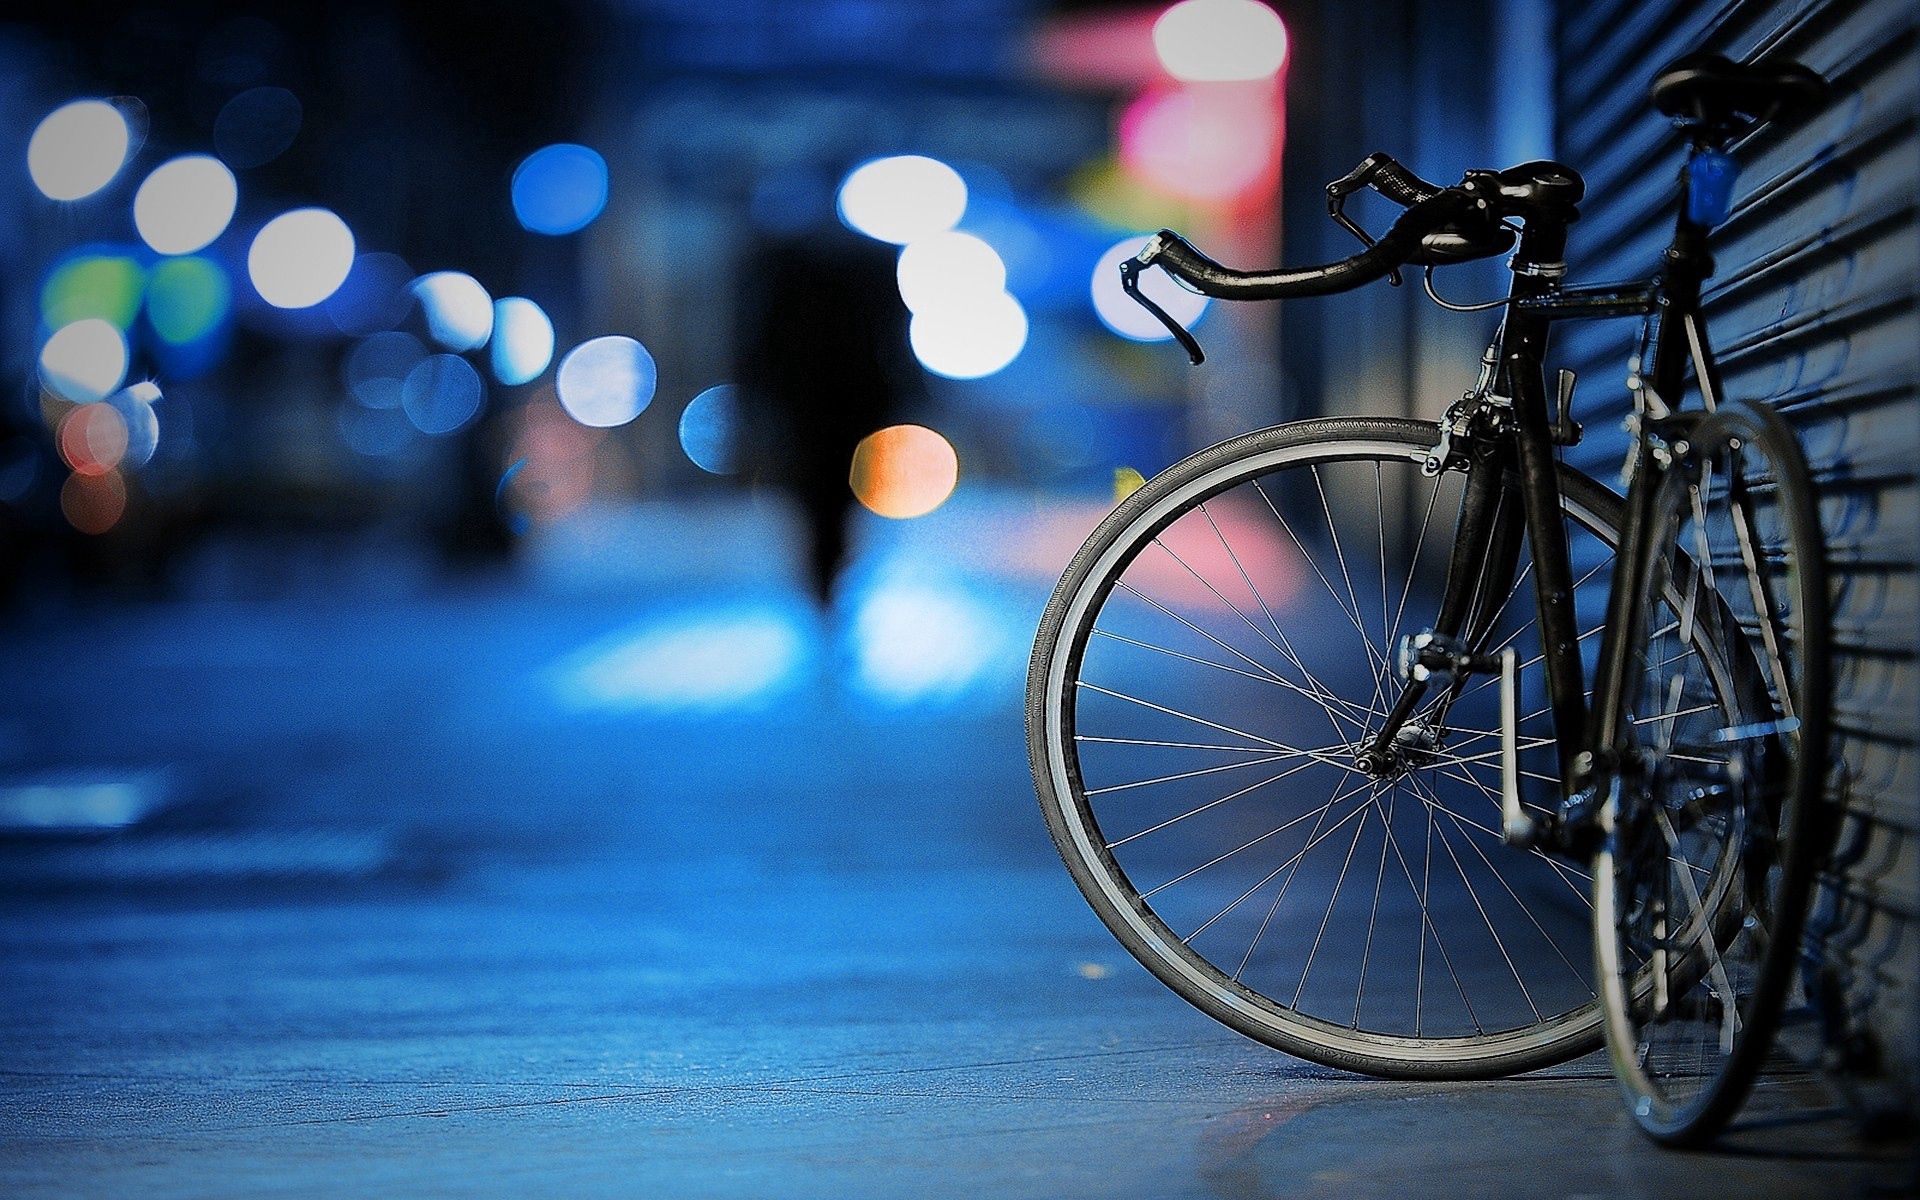 bicycle, miscellanea, miscellaneous, wall, evening, street phone background